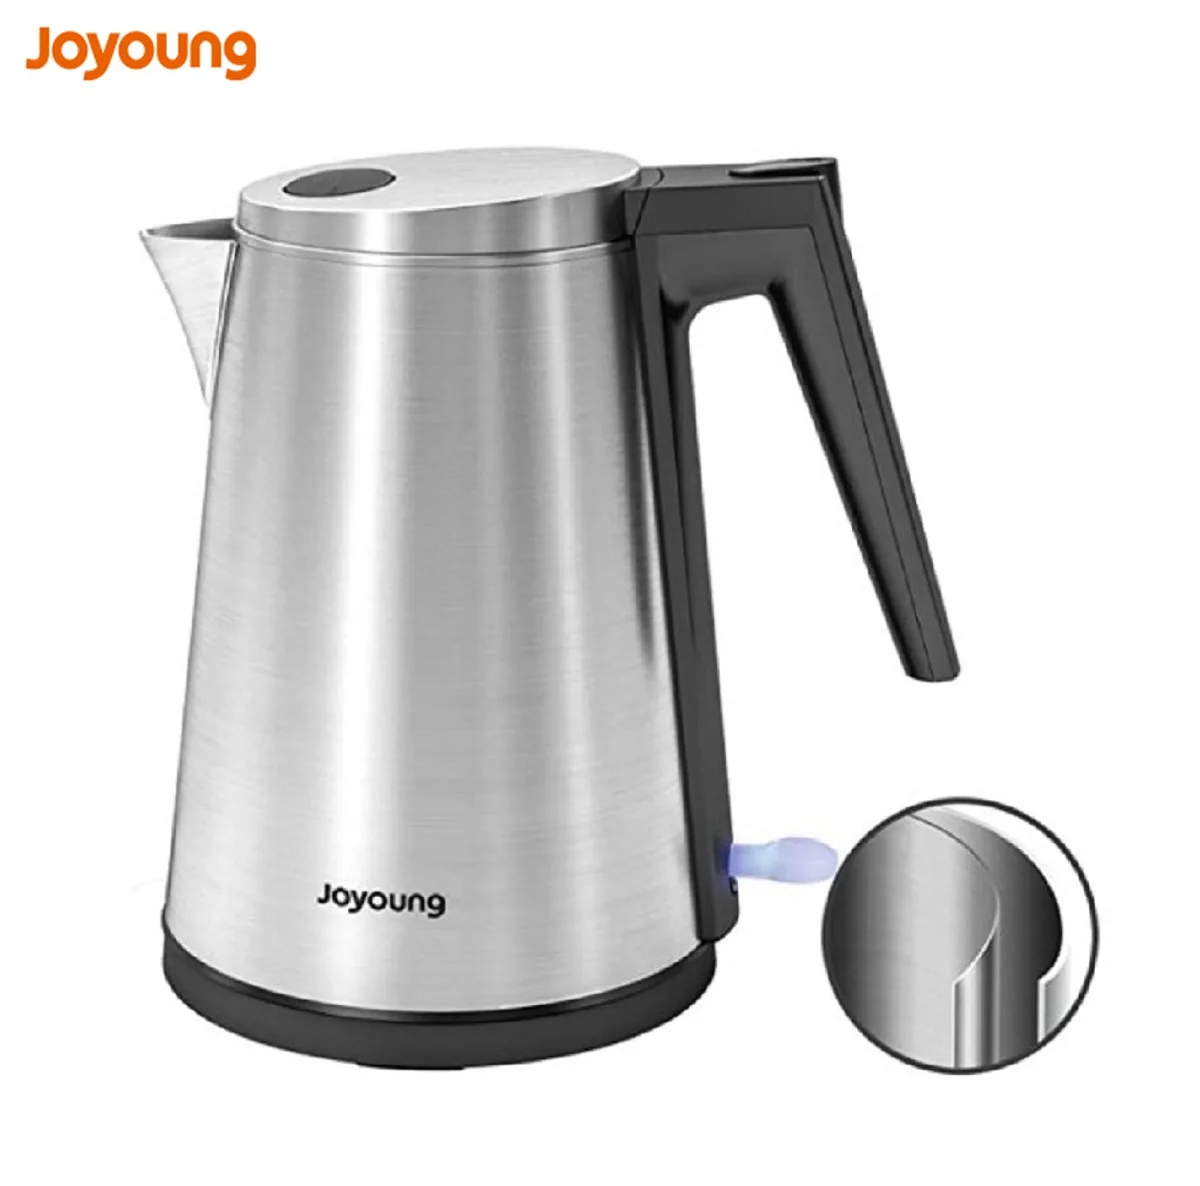 JOYOUNG 1.5L Electric Kettle Stainless Steel Kettle Double Layer Hot Water Kettle Electric BPA-free Electric Water Kettle